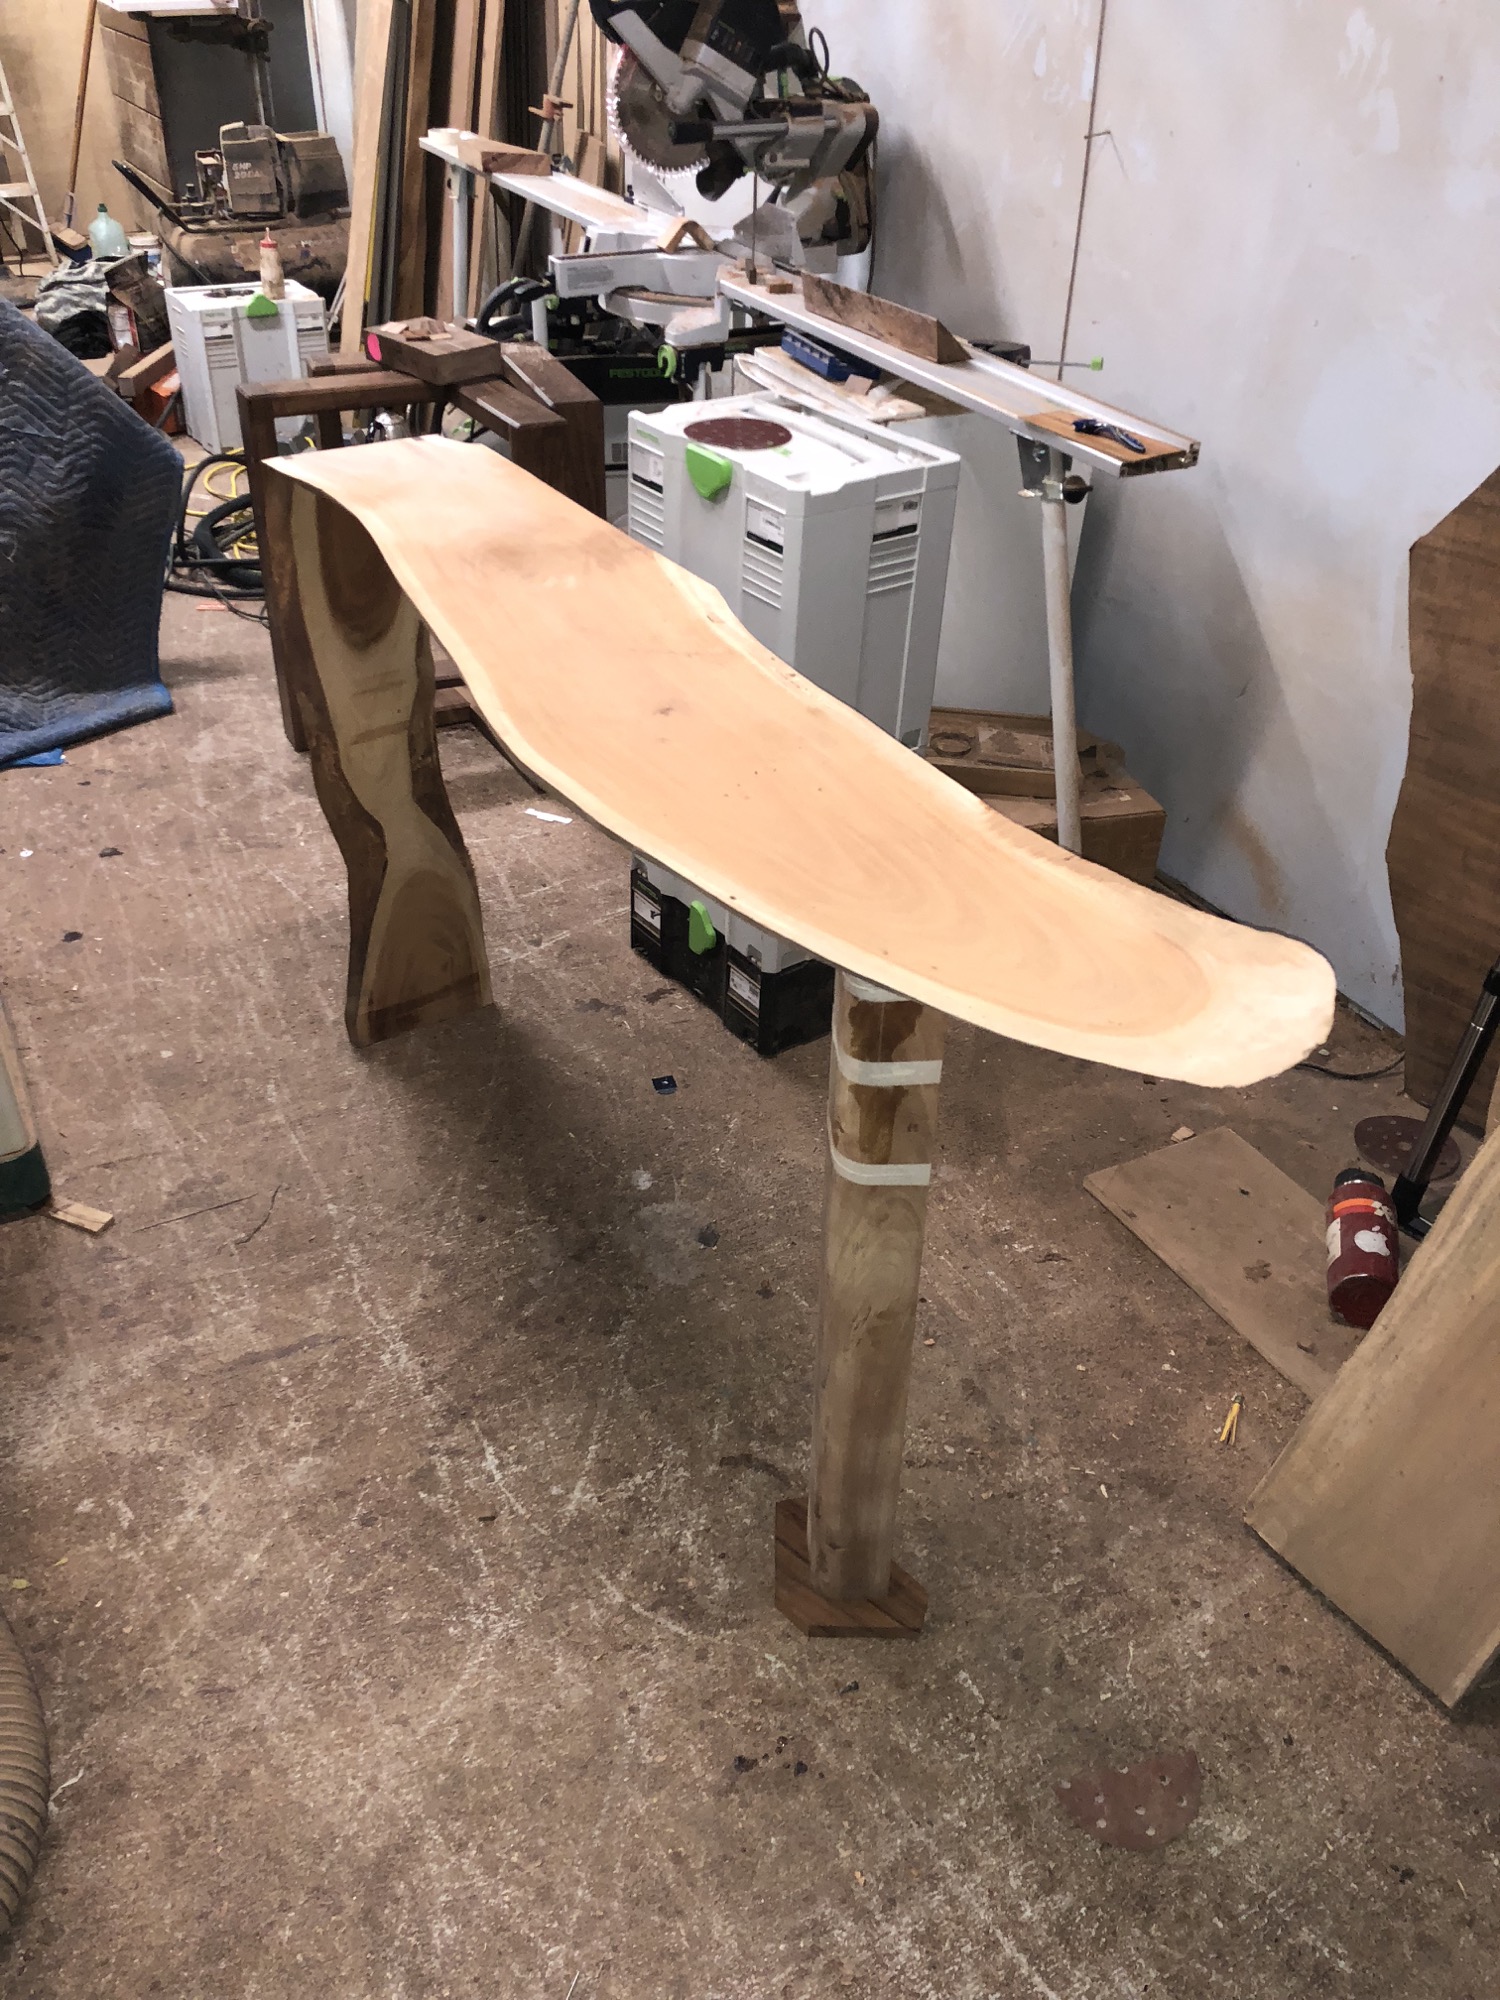  Okay, that was a bit of technical woodworking. Not super simple, but not crazy complicated either. This part was much harder for me. I needed to design a leg that works with the shape of this piece. The slab has very organic lines from the natural e